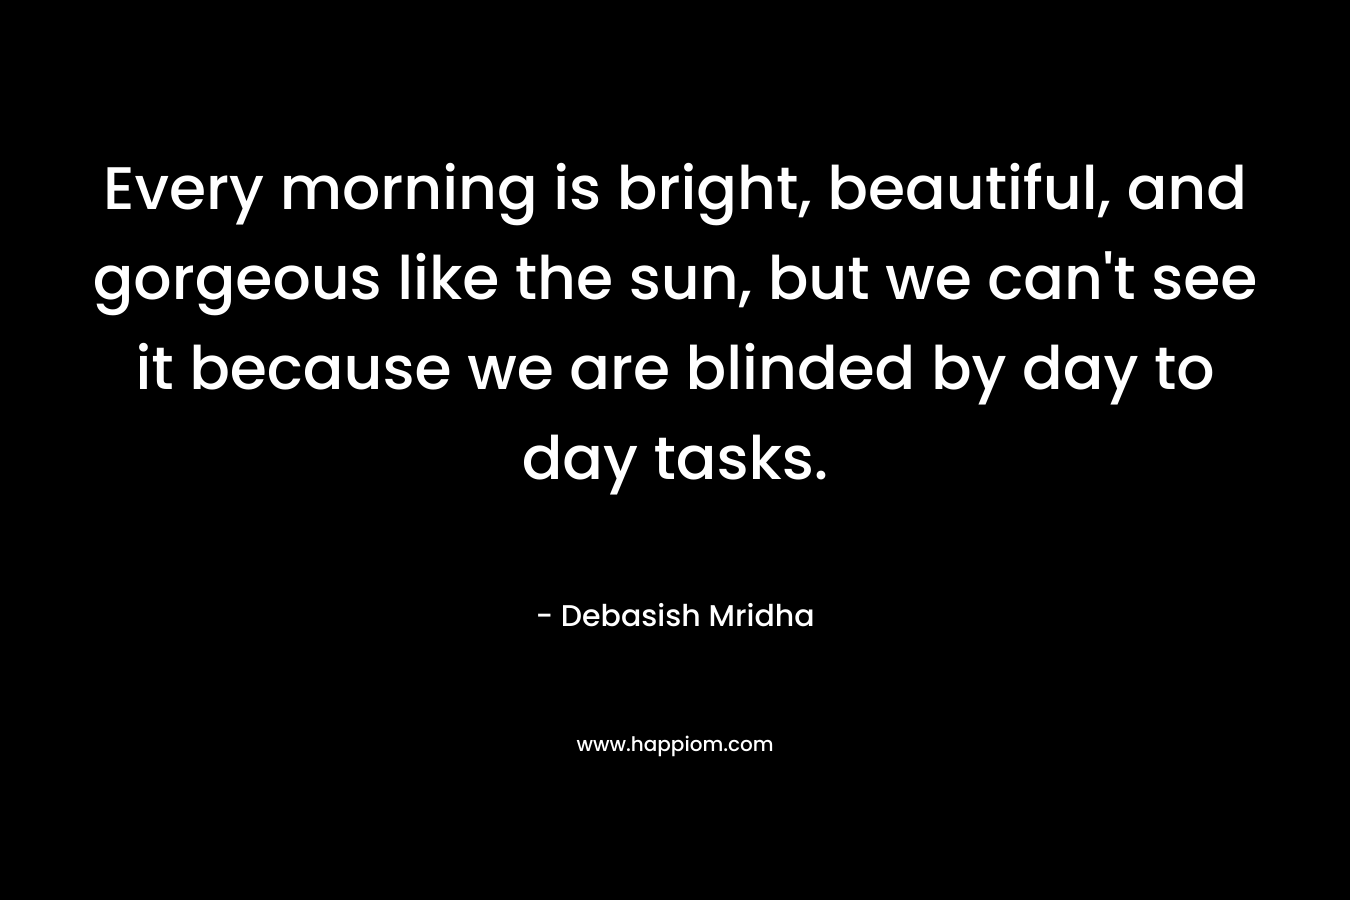 Every morning is bright, beautiful, and gorgeous like the sun, but we can't see it because we are blinded by day to day tasks.